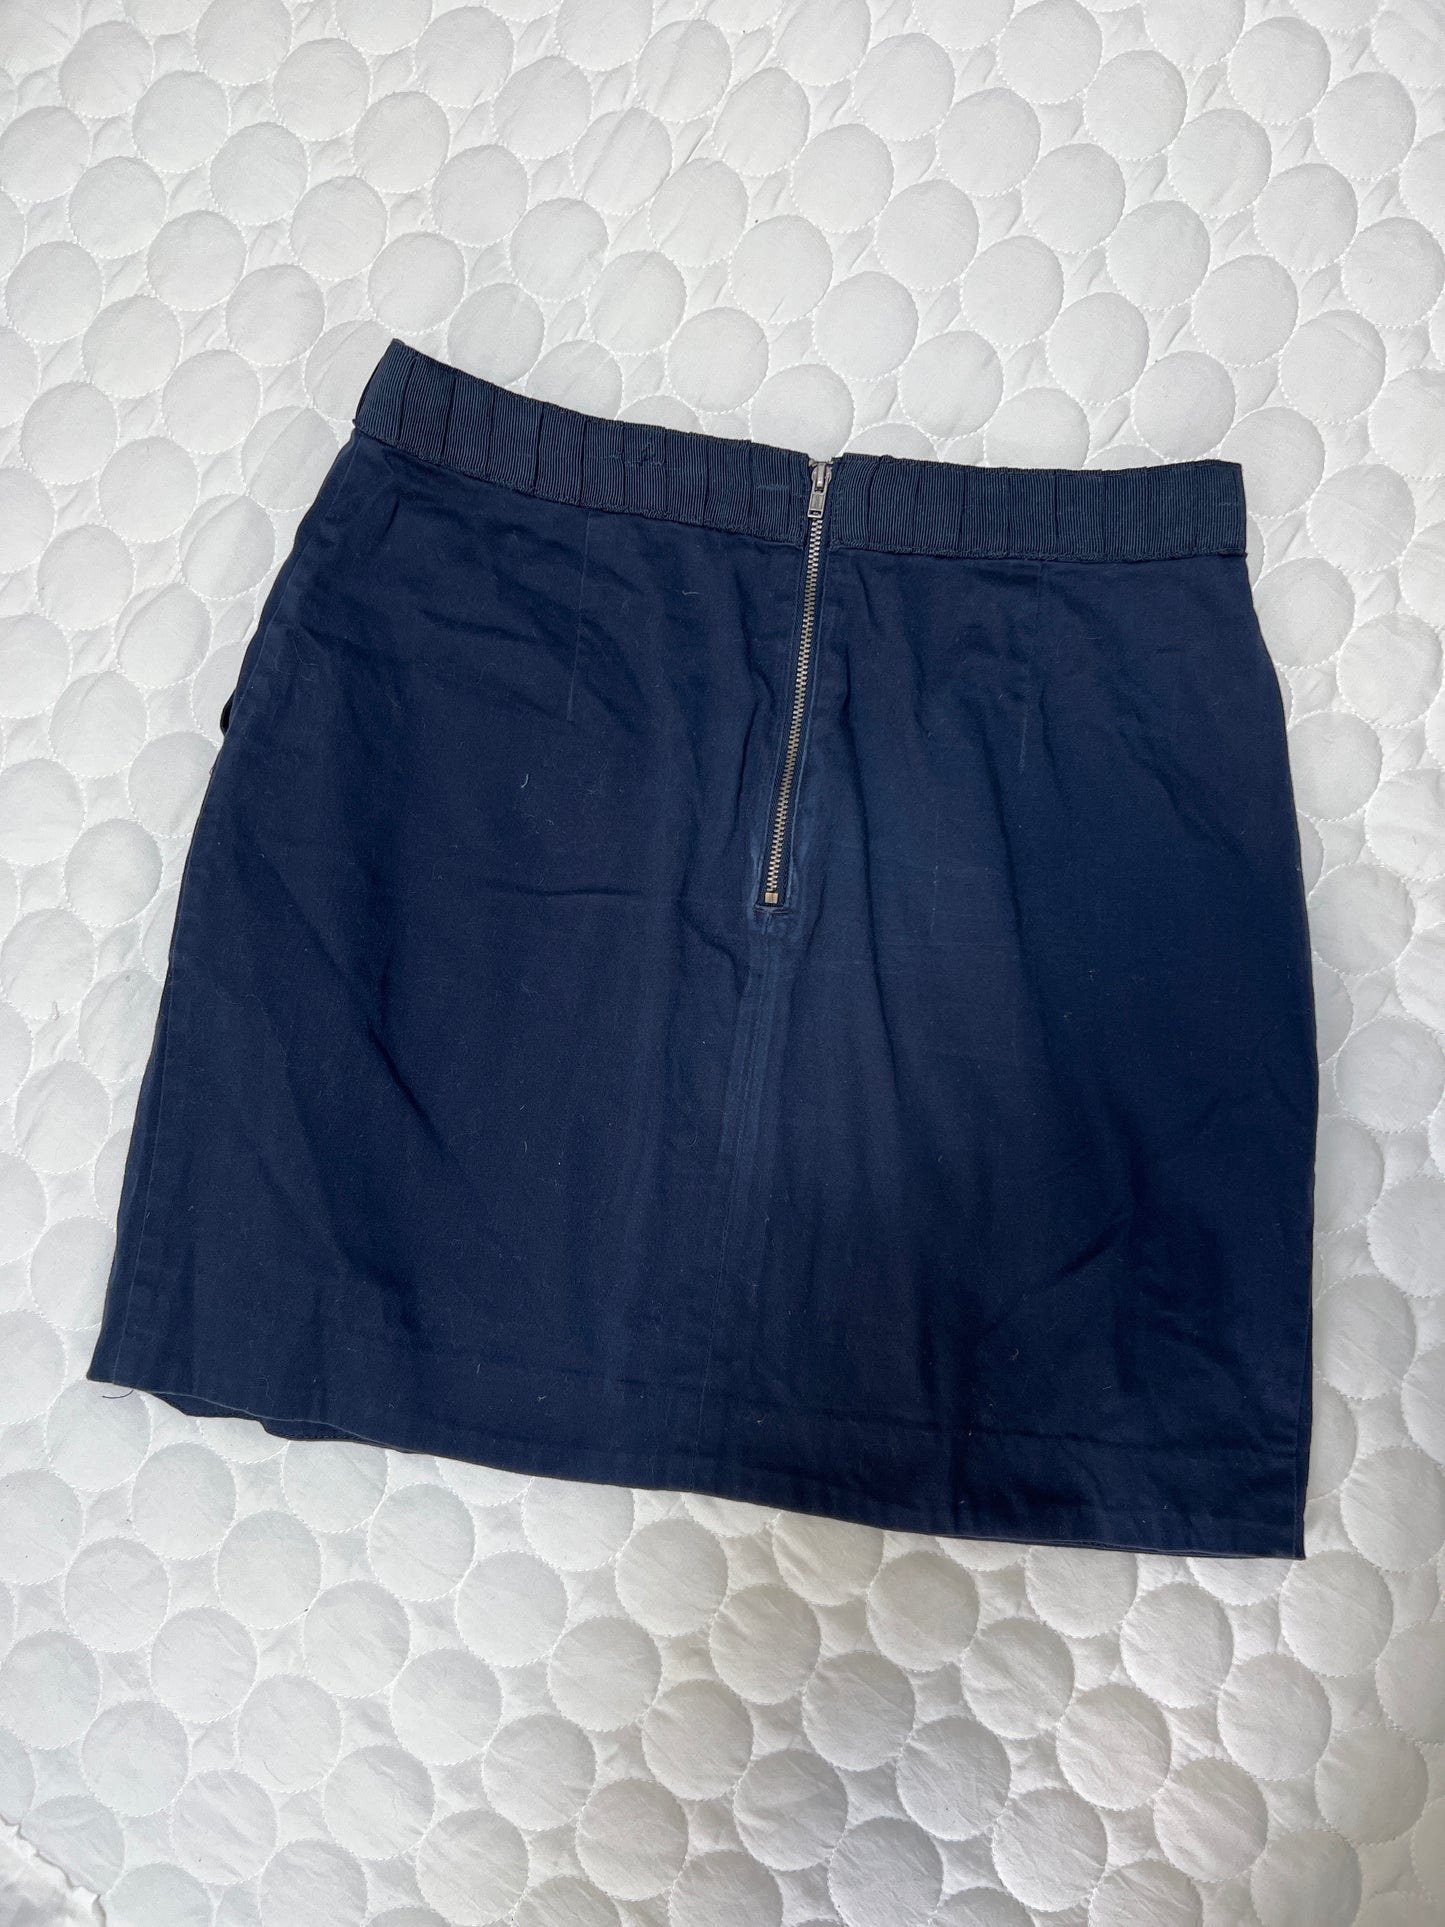 Size 12 H&M navy skirt with pockets and exposed zipper in back. VGUC